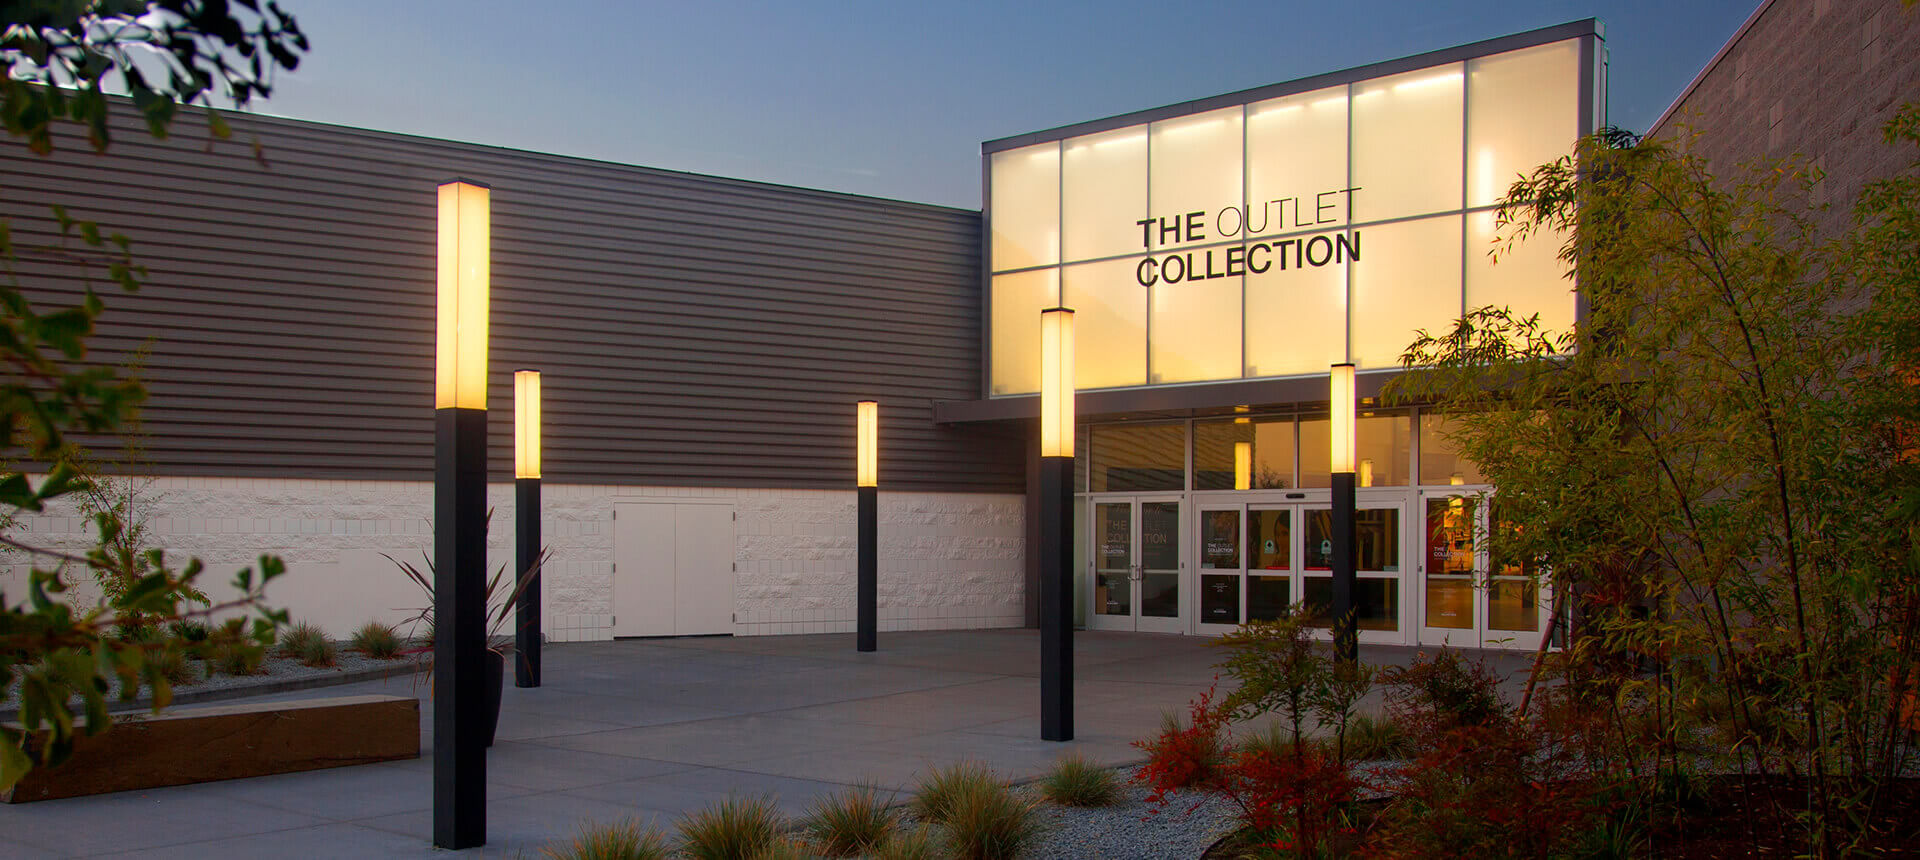 The Outlet Collection 1